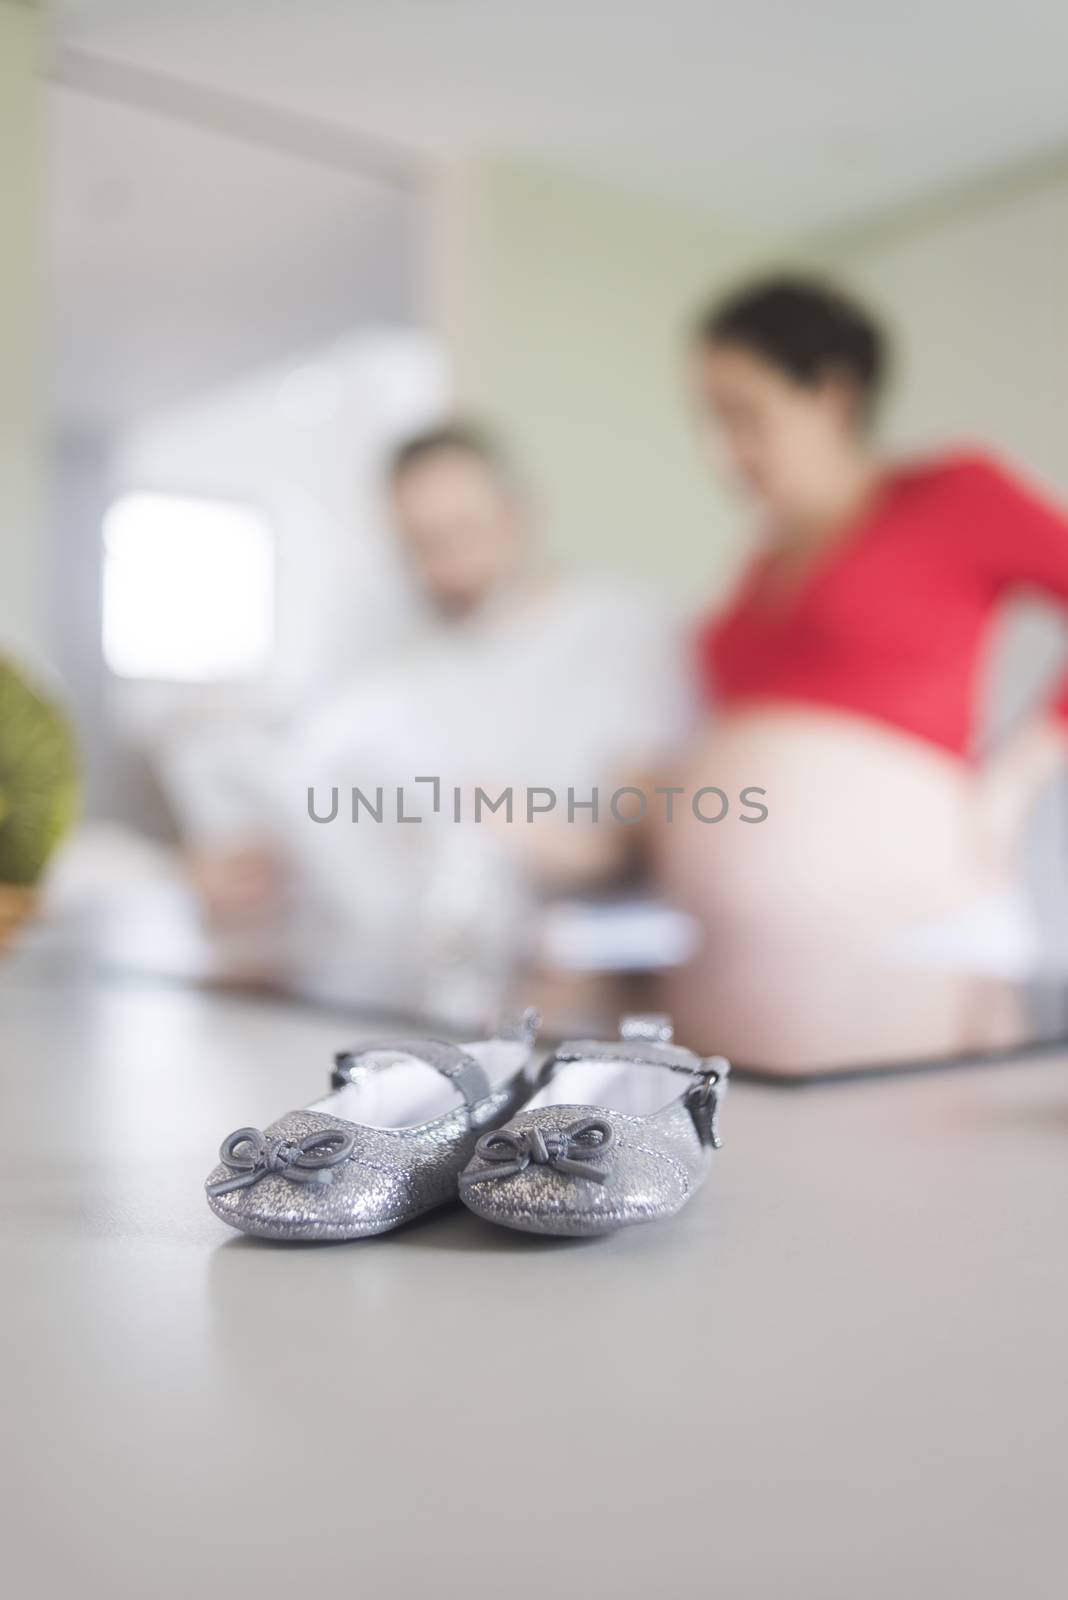 Newborn shoes on a kitchen table while expecting couple standing unfocussed in the background by raferto1973